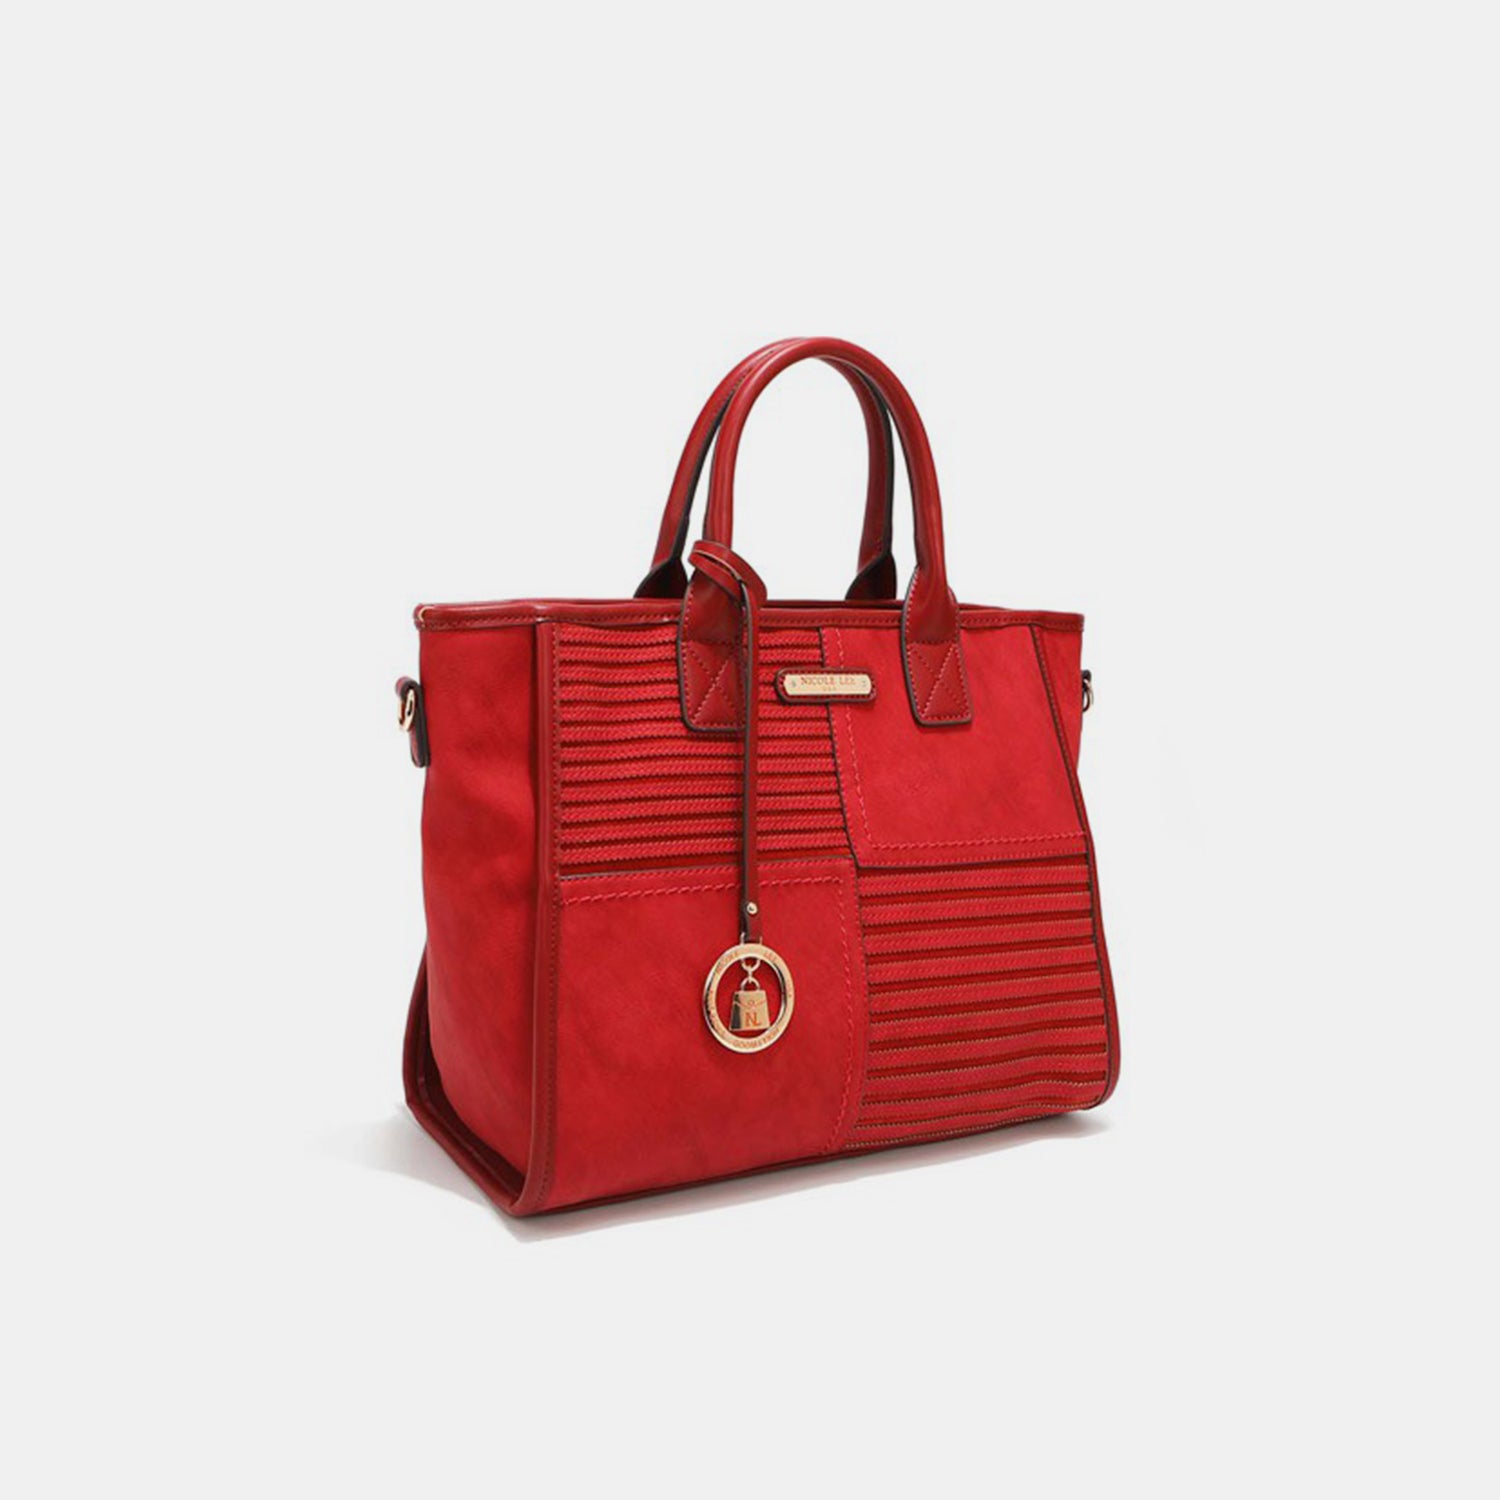 The Nicole Lee USA Scallop Stitched Handbag from Marianela's Exclusive Shop, LLC is a vibrant red vegan leather accessory with a structured silhouette and dual handles. The front boasts scallop-stitched panels and a small gold emblem with a dangling charm. This stylish and modern handbag exudes elegance, making it suitable for various occasions.